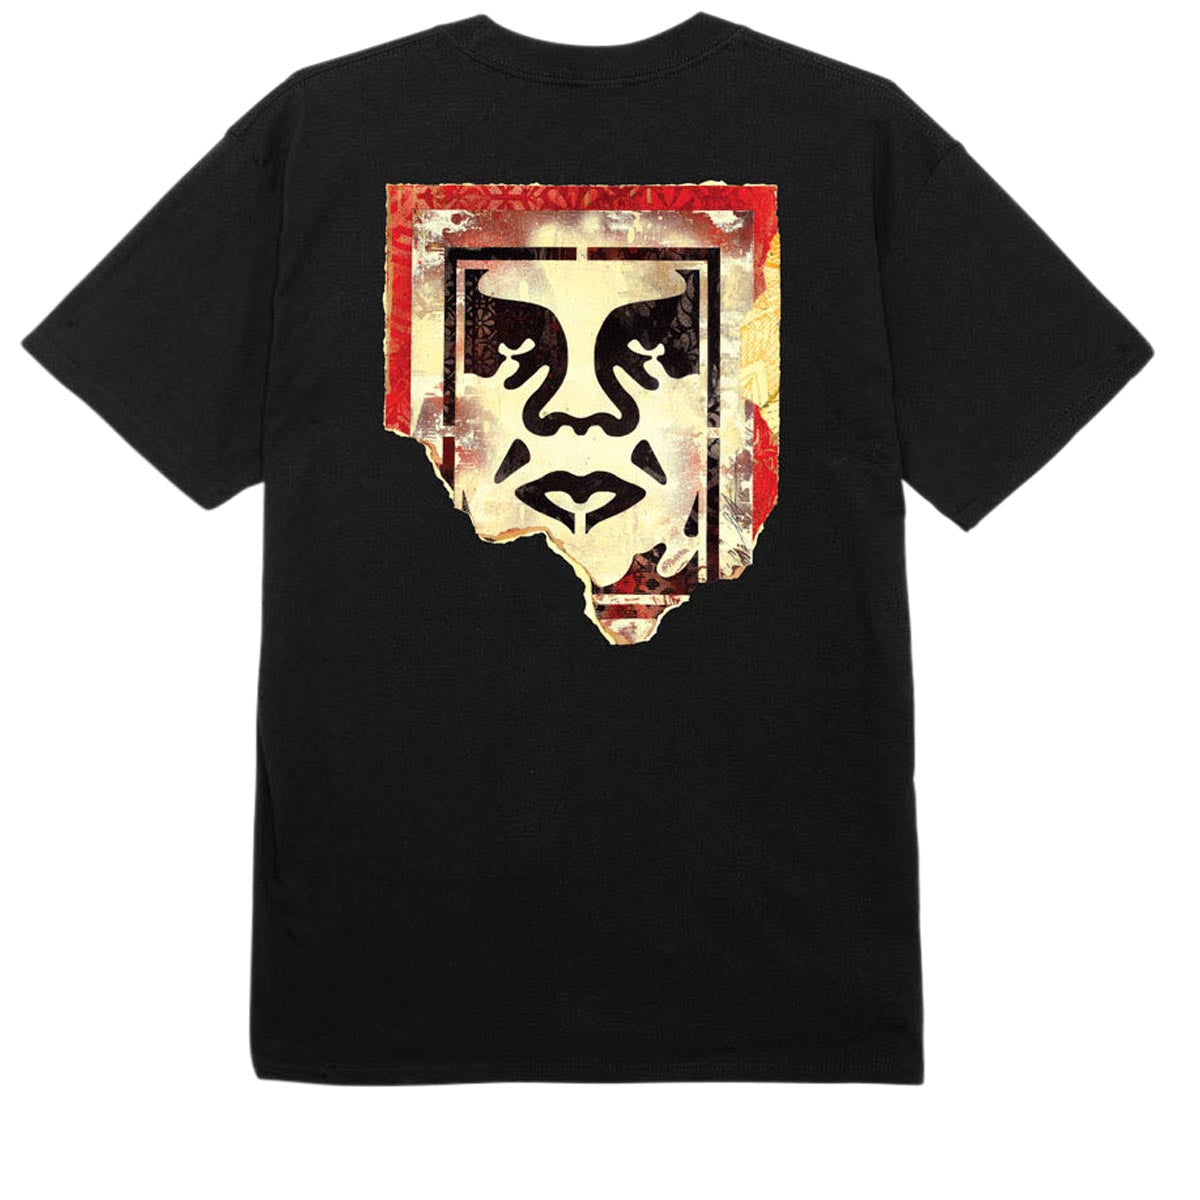 Obey Ripped Icon T-Shirt - Black image 1